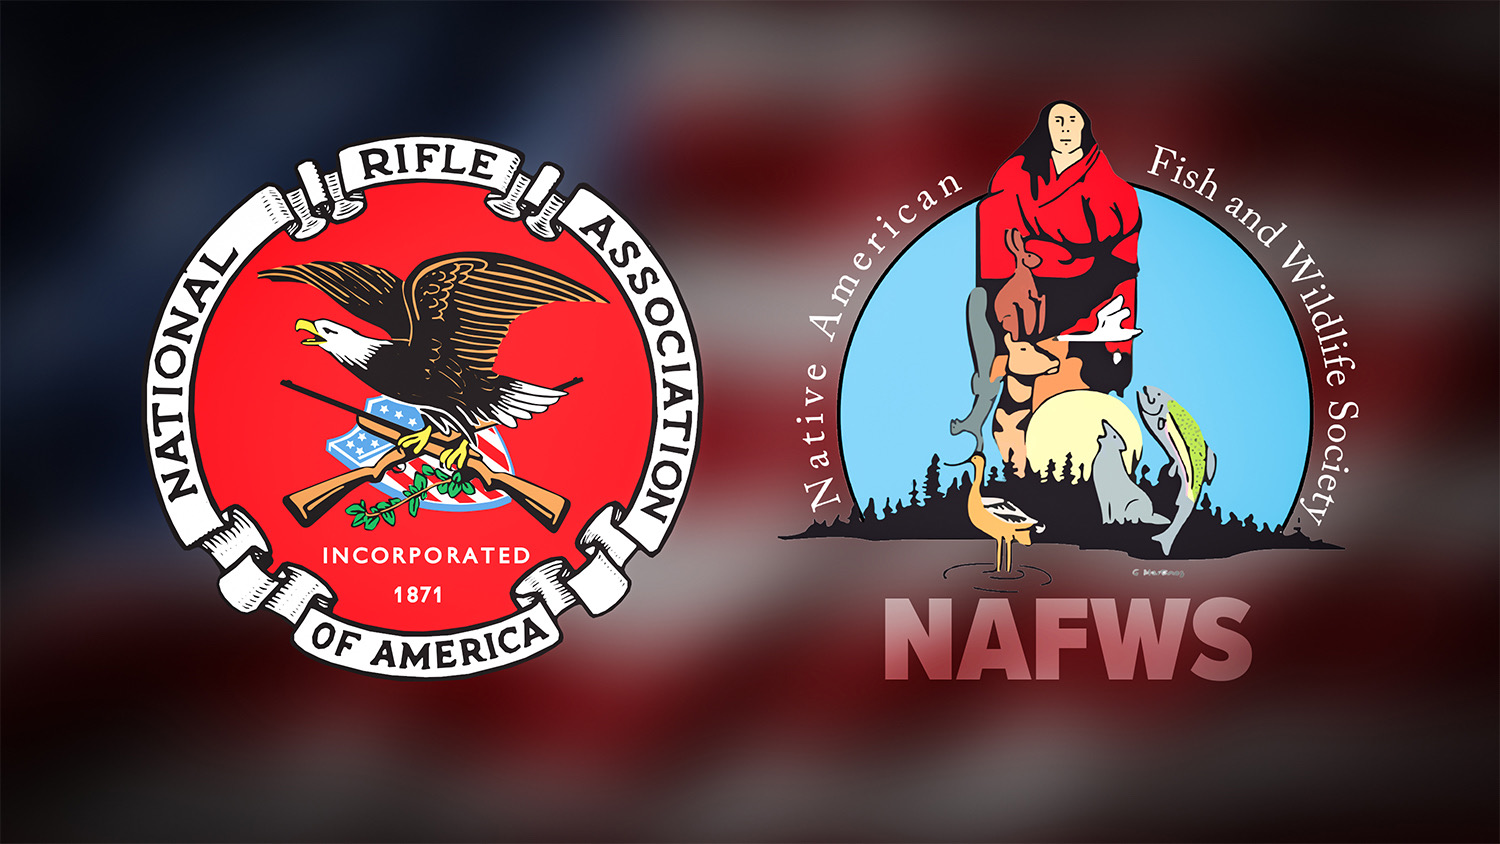 NRA Partners with NAFWS to Deliver Free Online Hunter Education